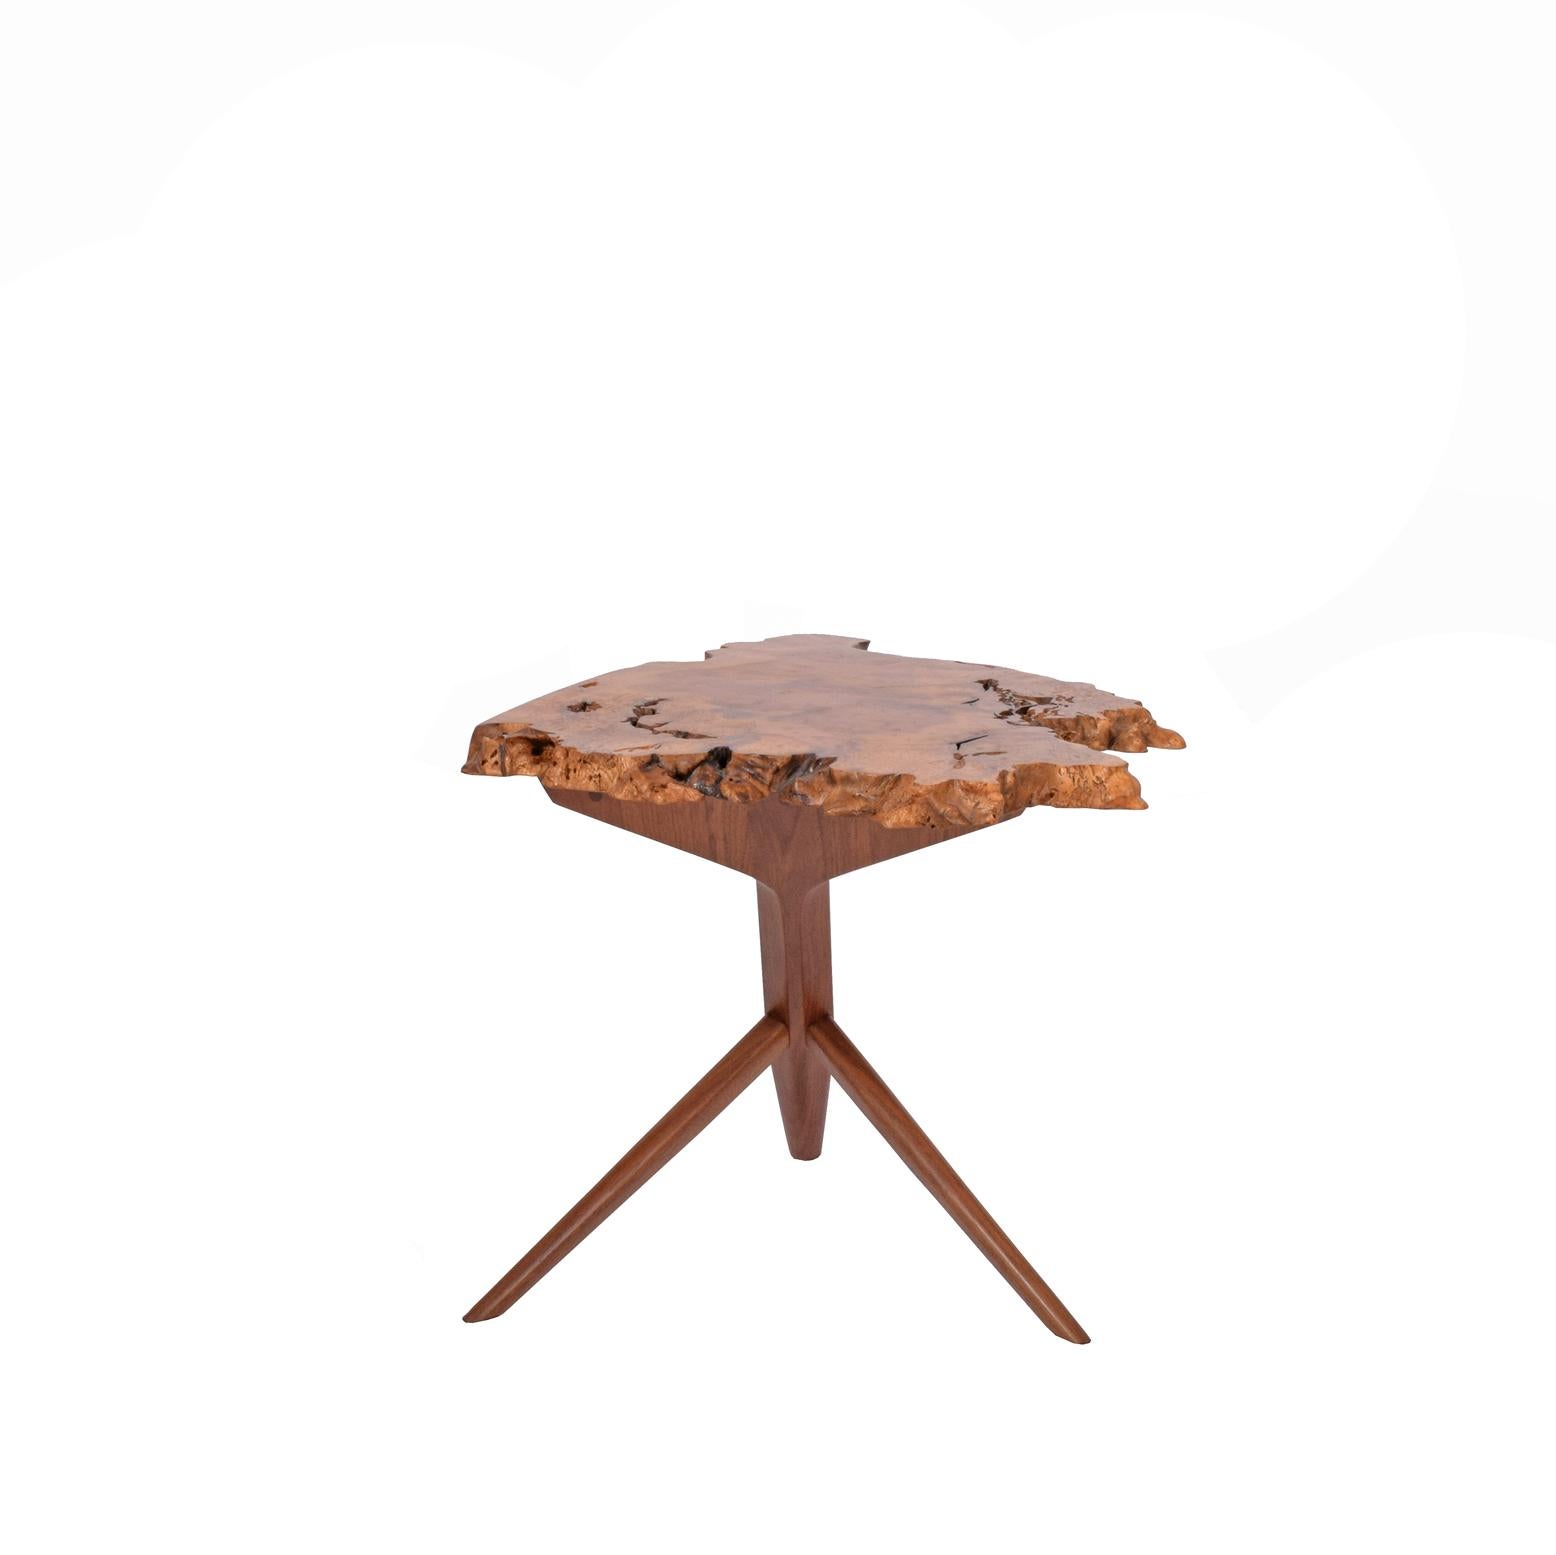 Burl Myrtle top with solid walnut Conoid X-leg base made by Mira Nakashima 2009 signed and dated from important collection of Professor Architect John Fairey copy of the drawing inc.